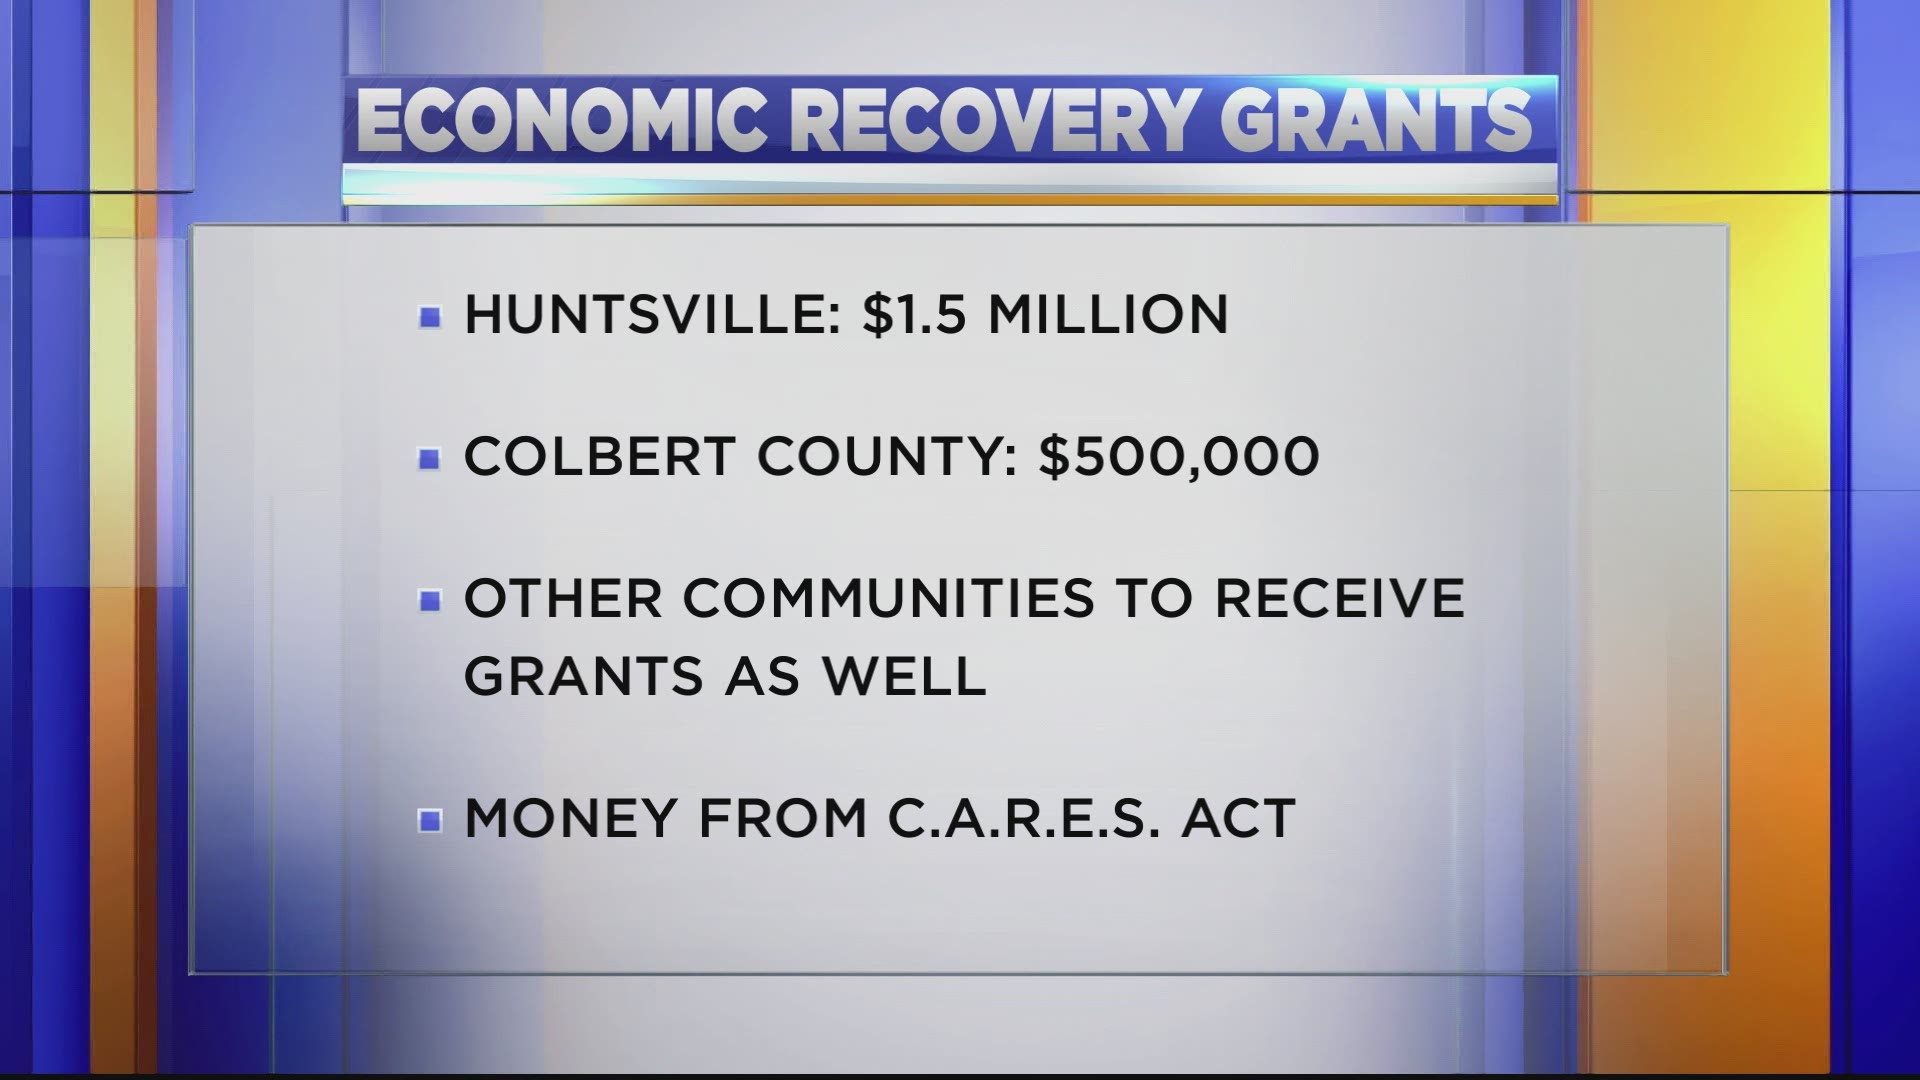 Huntsville is set to use $1.5 million to aid people without housing while Colbert County plans to start a mobile health clinic.